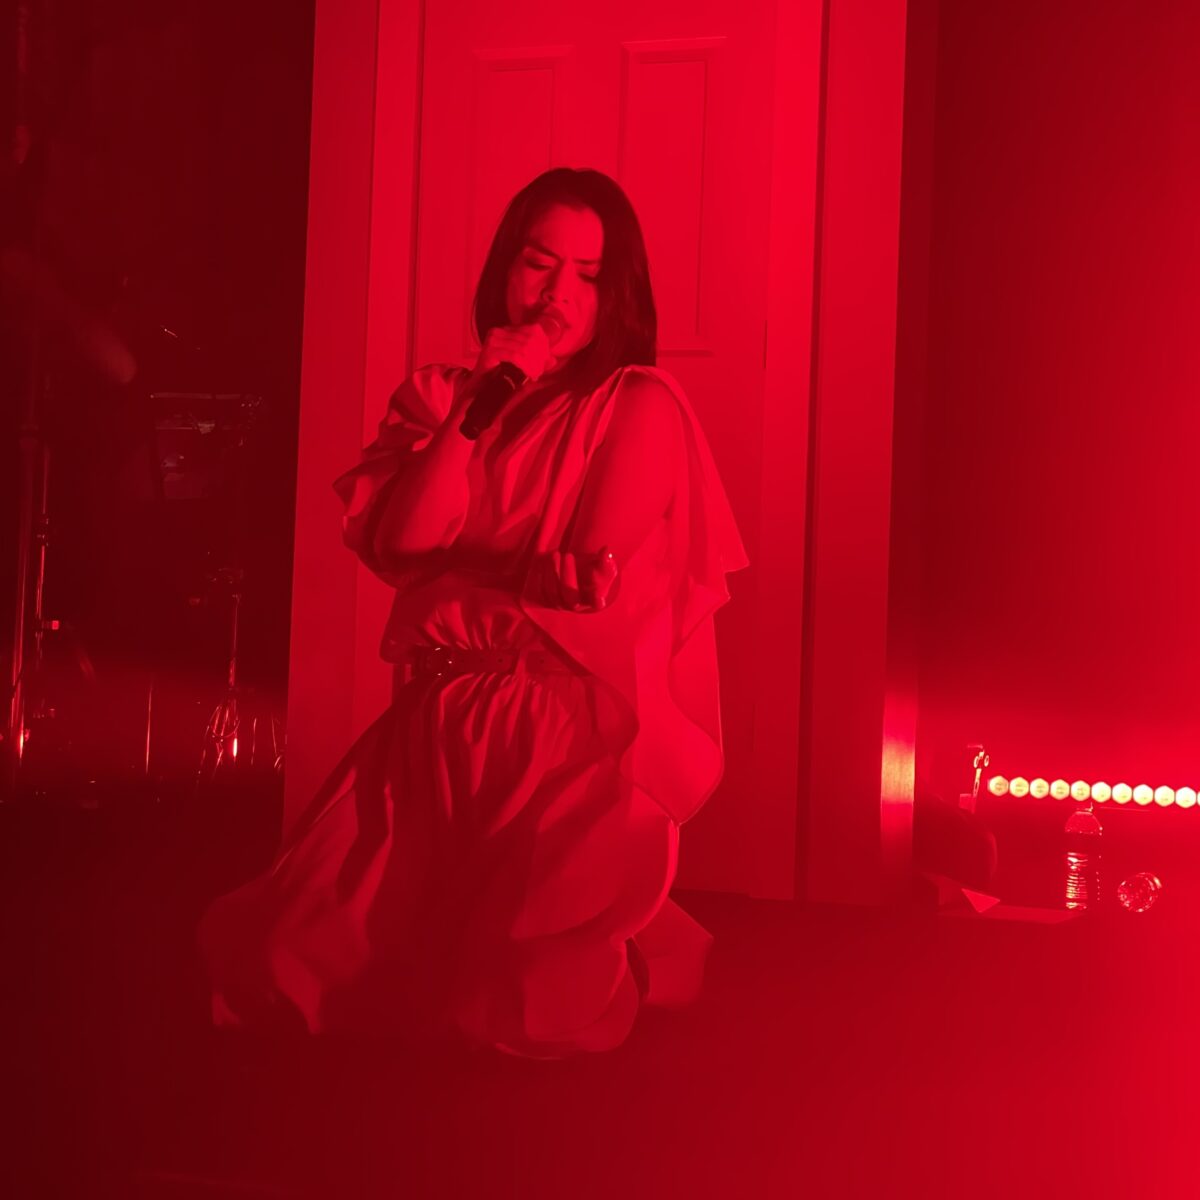 Mitski on stage, coated in red lighting.